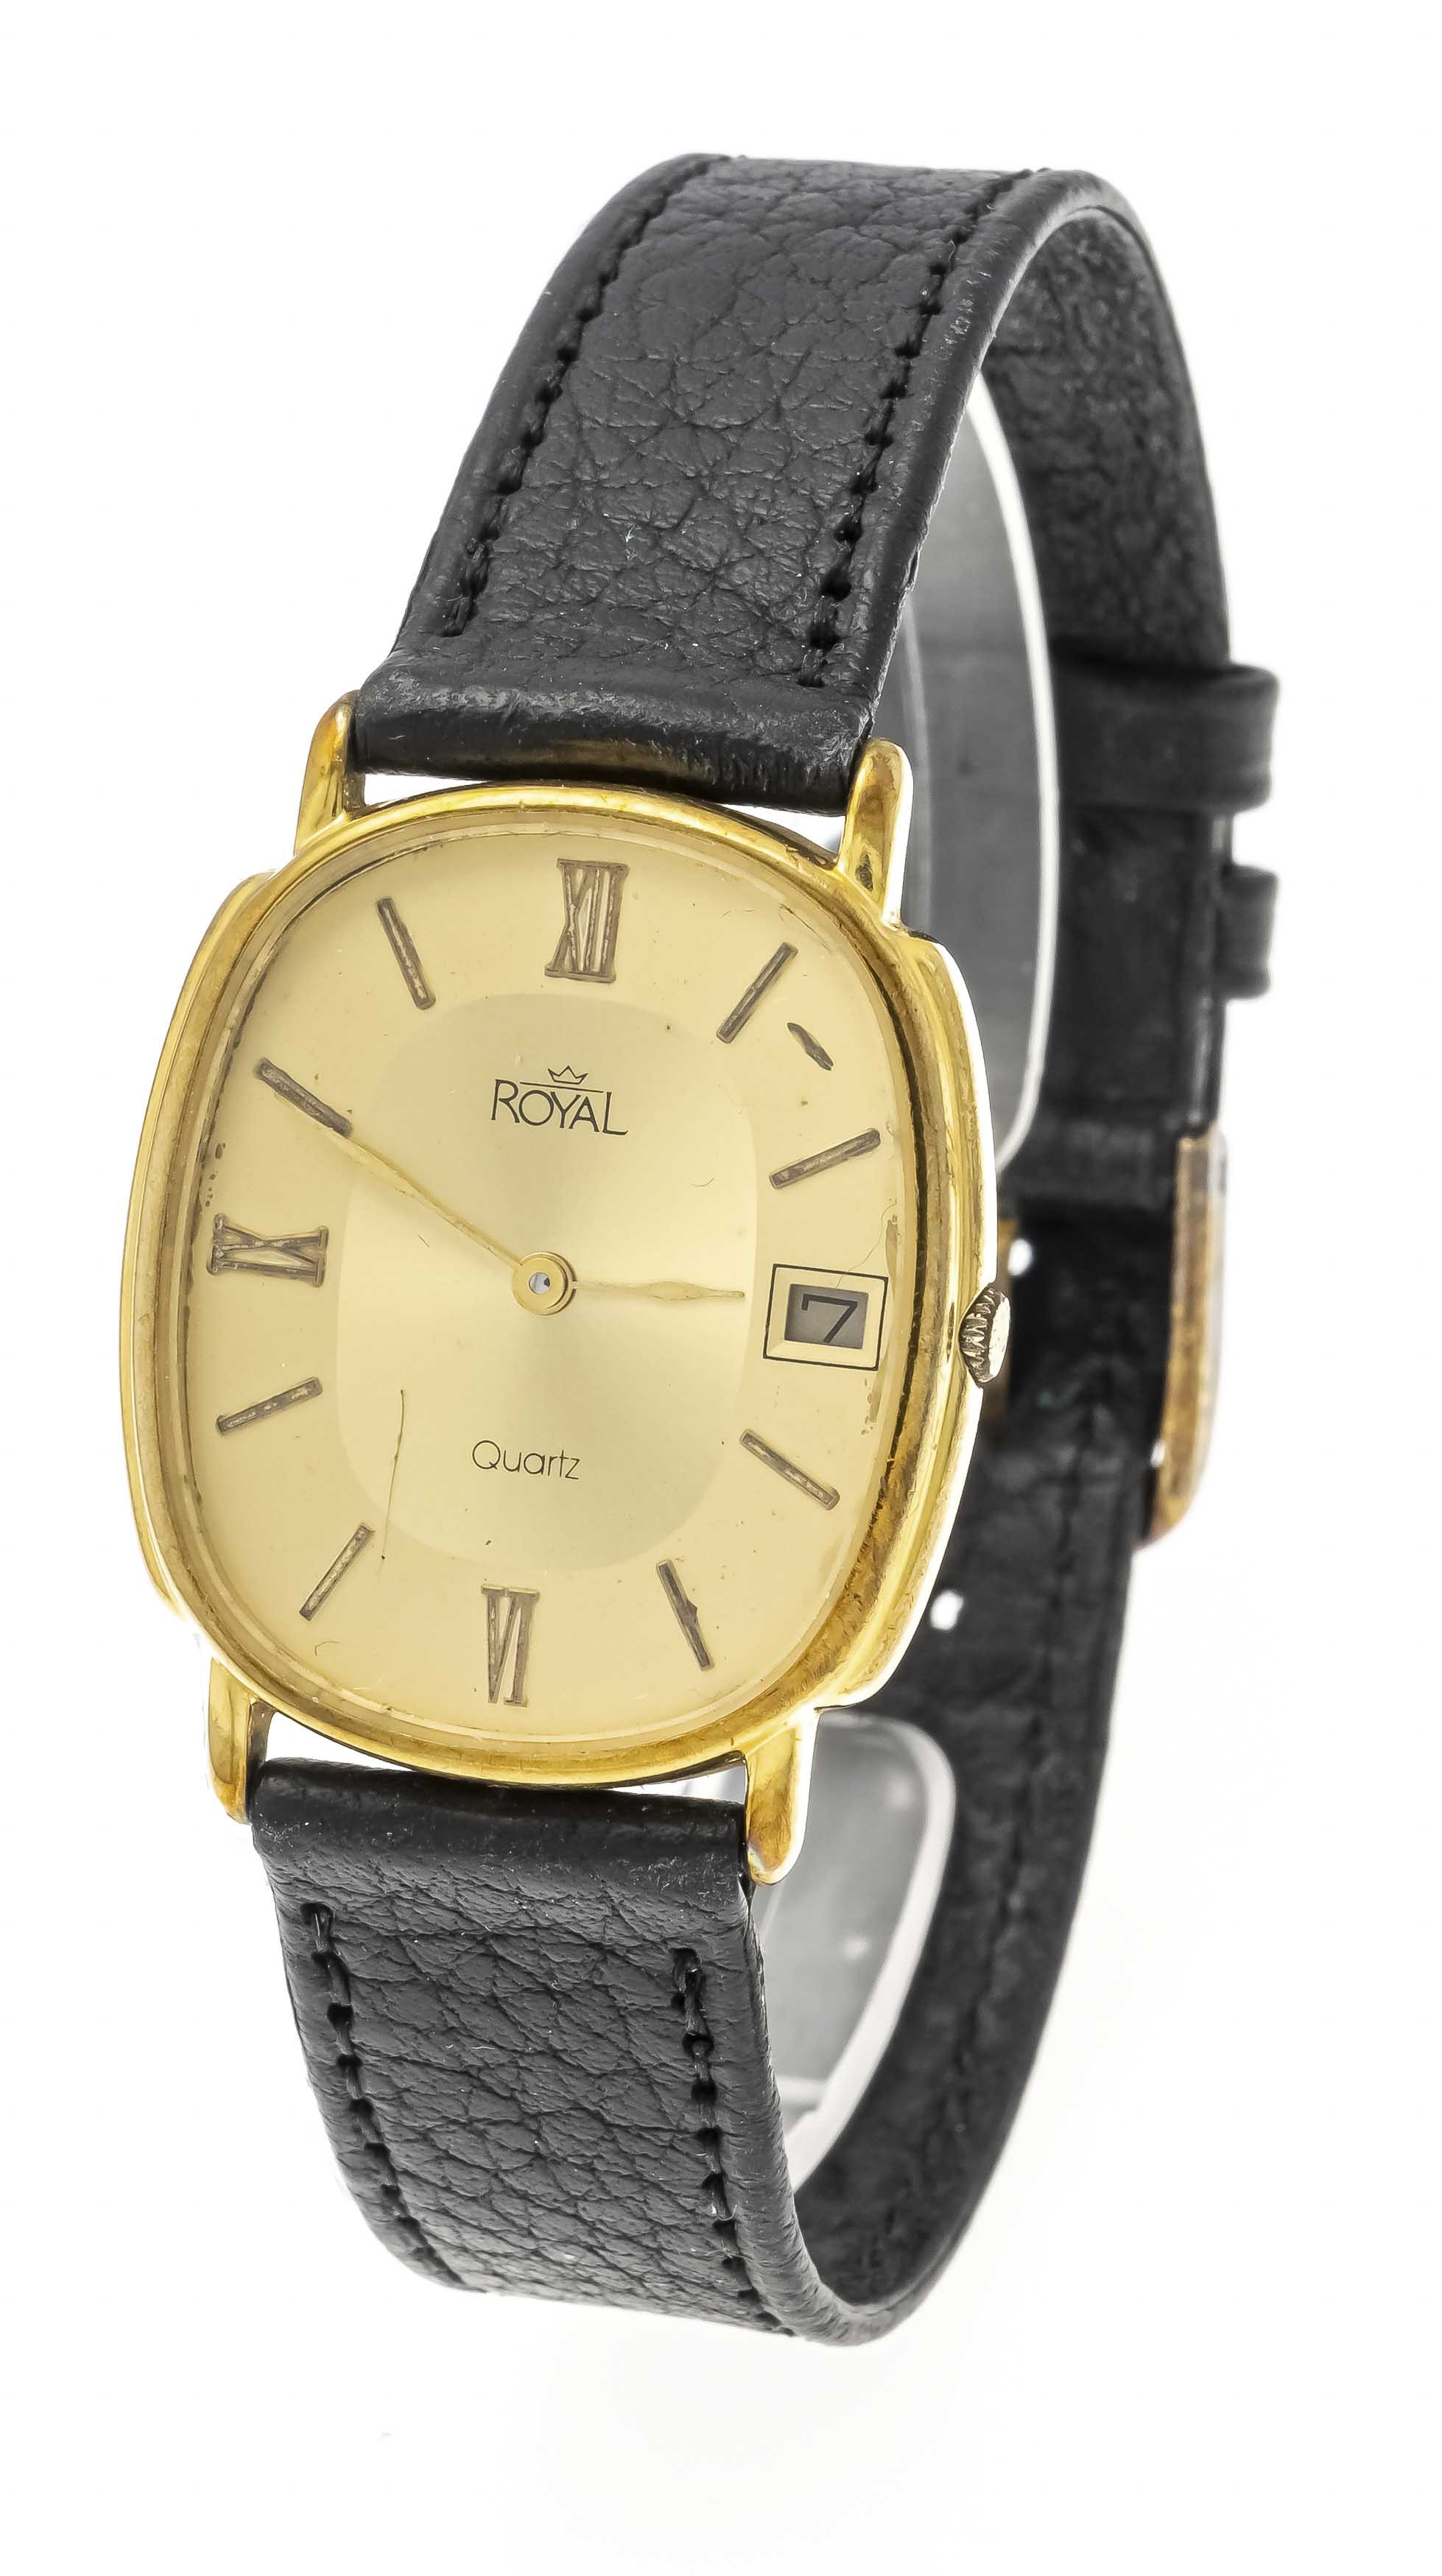 Royal men's quartz watch, 333/000 GG, oval case, gold dial with gilded roman numerals, bars and